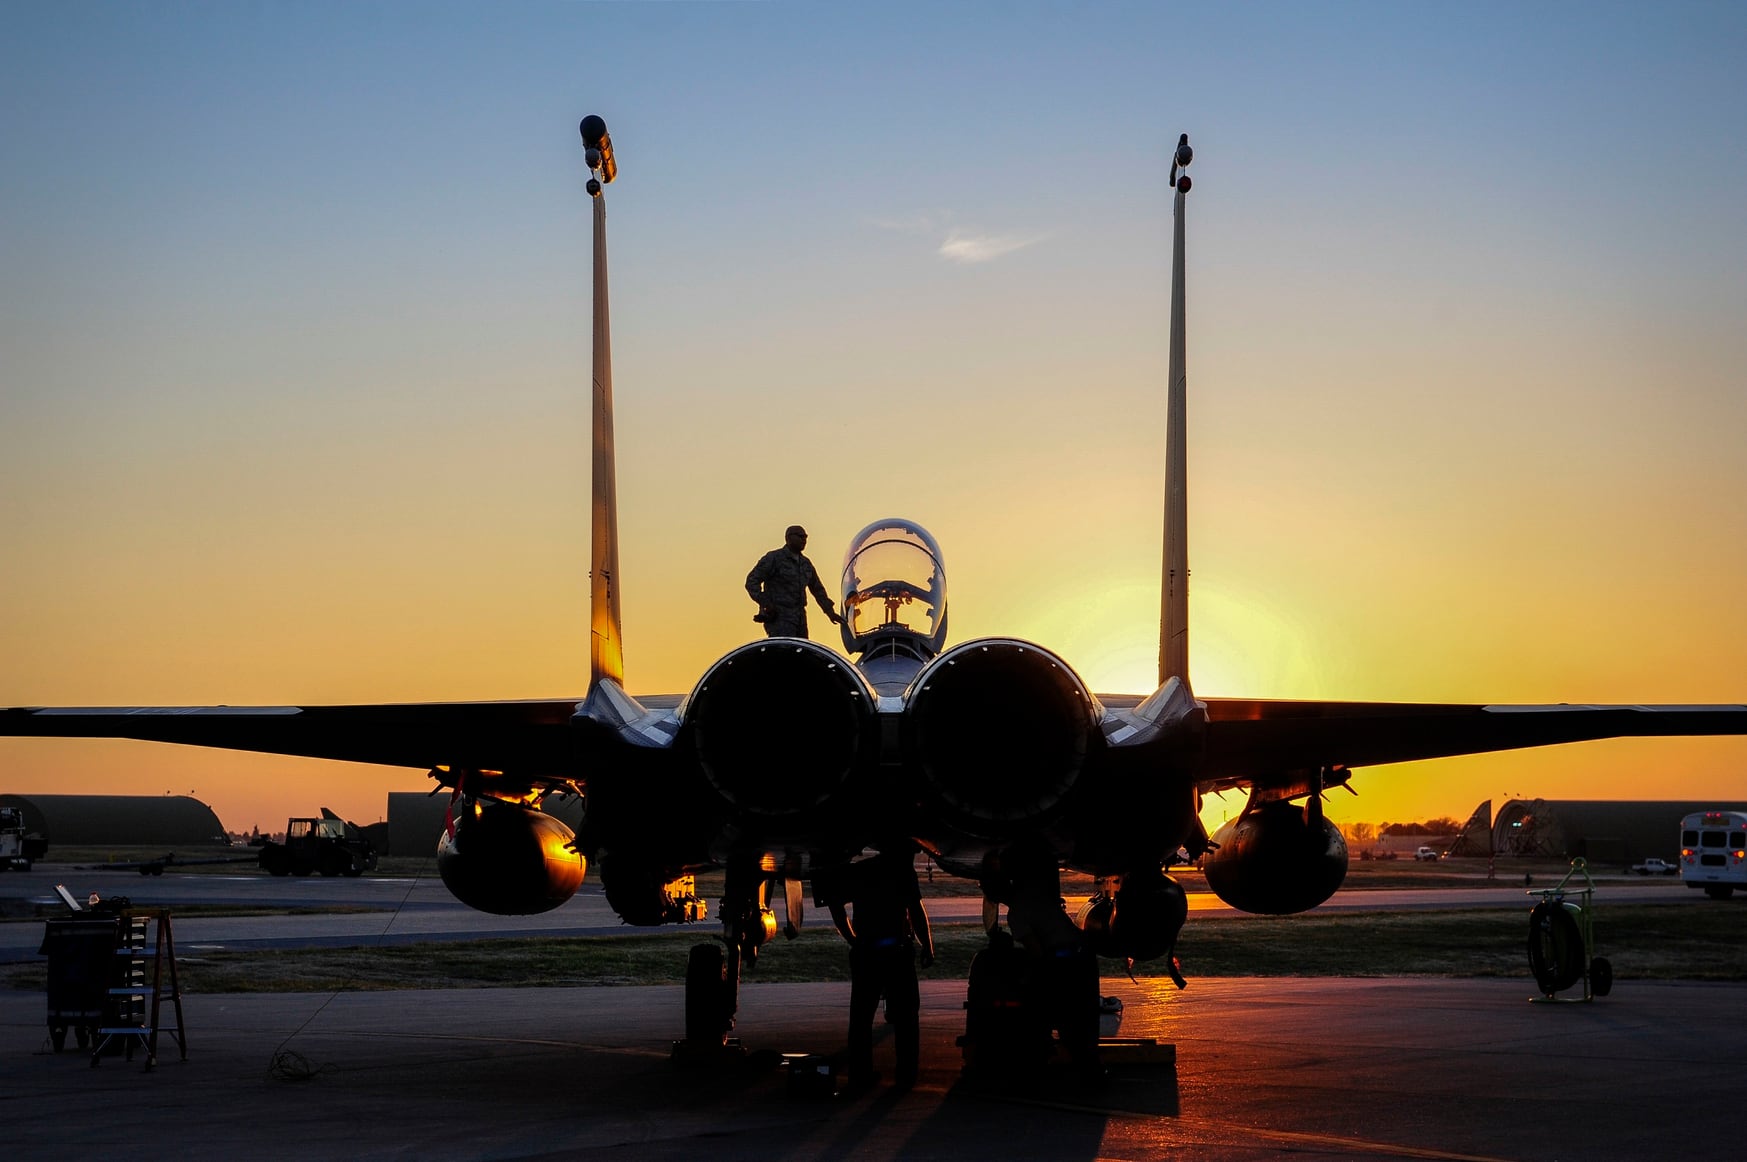 Fighter jets may be the least impacted by the altimeter concerns. (Airman 1st Class Cory W. Bush/U.S. Air Force)